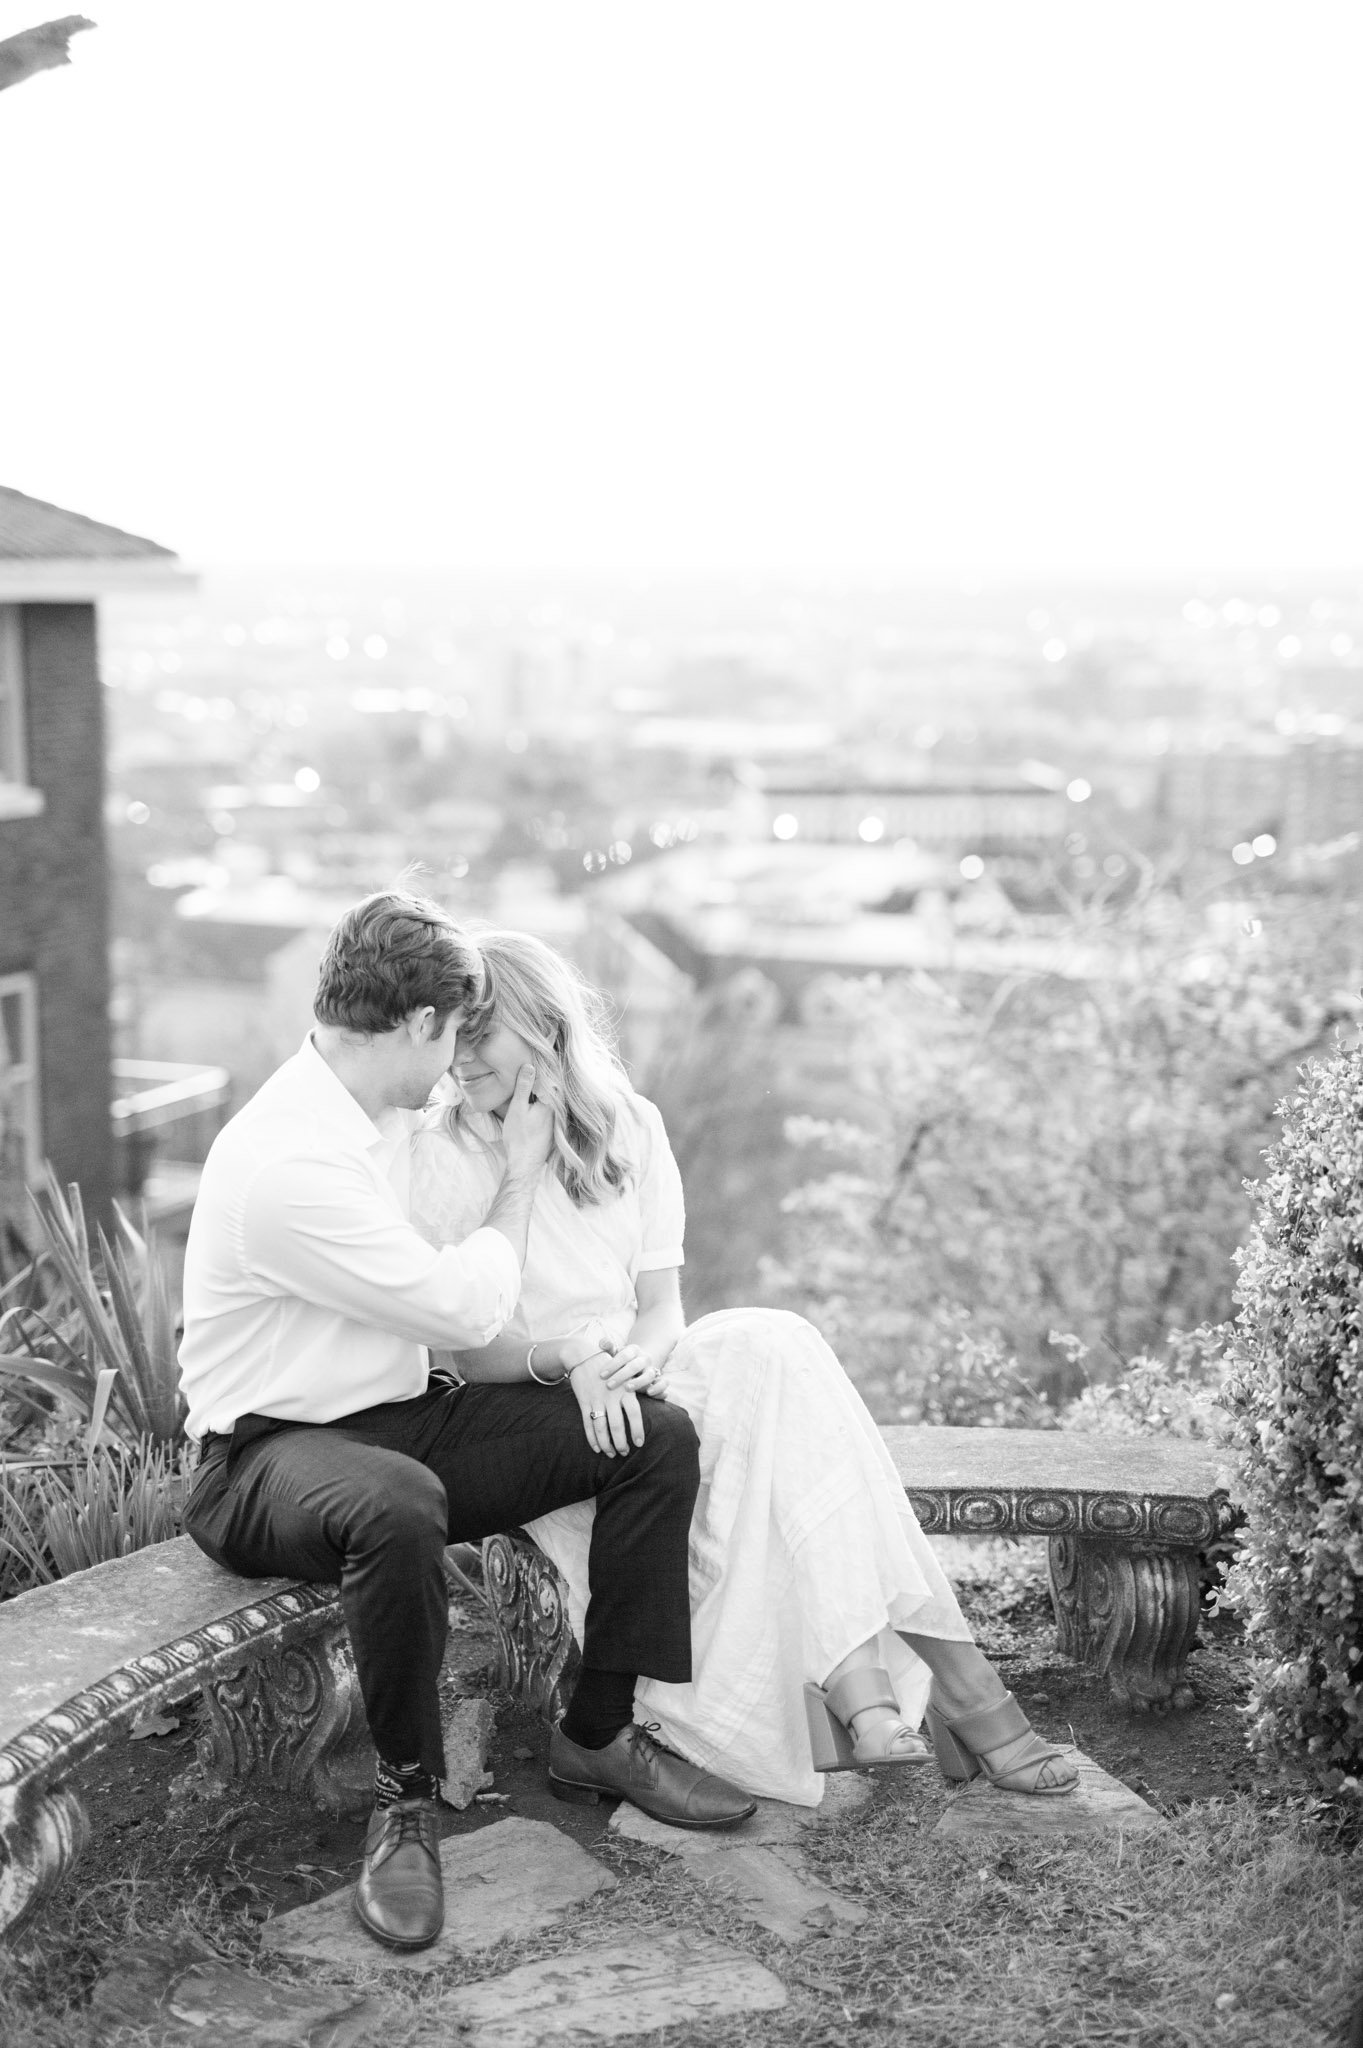 Couple cuddle on bench overlooking city.